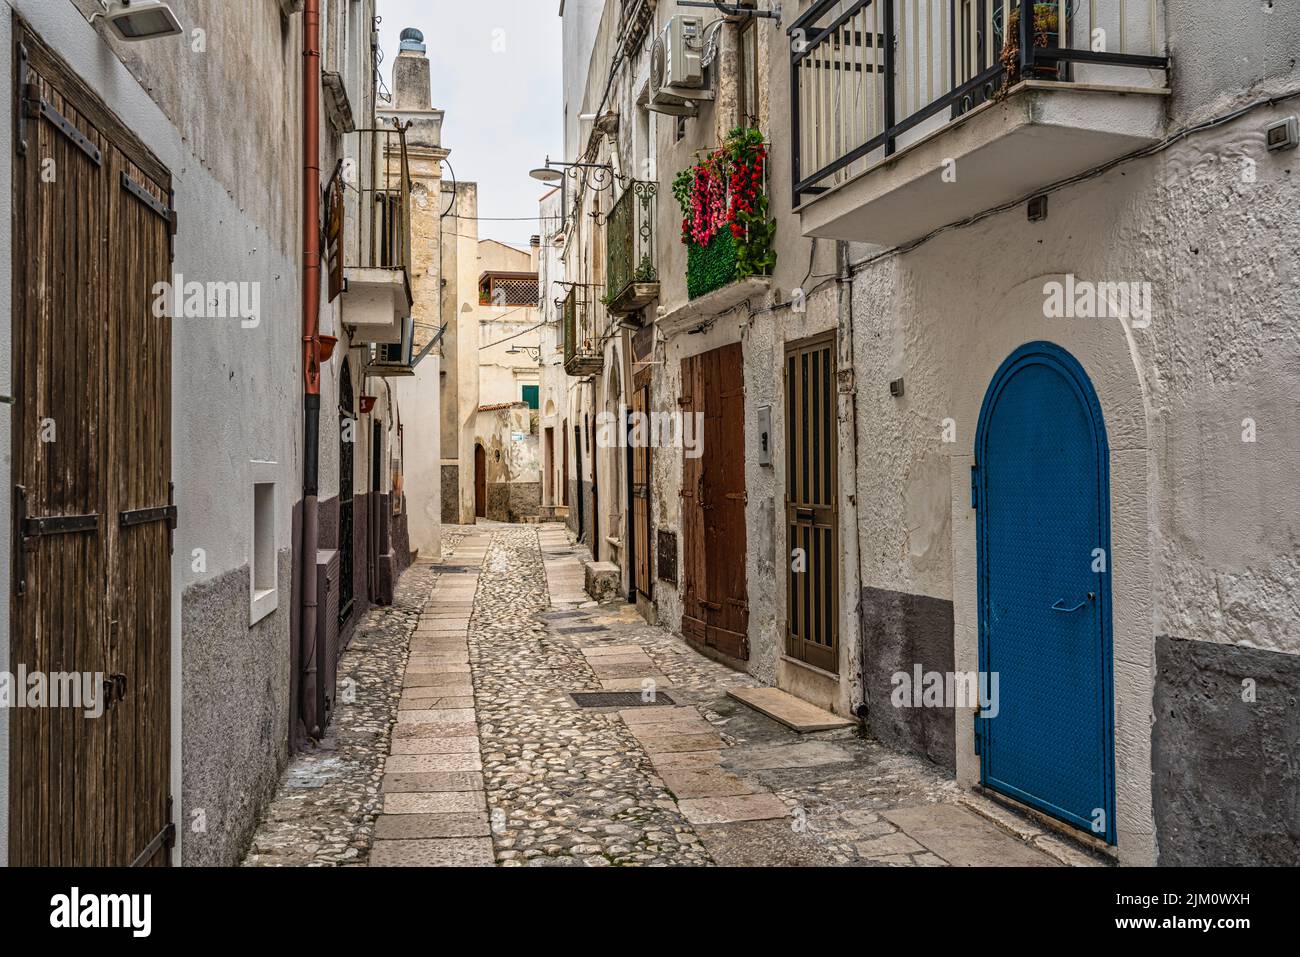 Characteristic alley with the cobbled stairway typical of the small seaside villages of Puglia. Peschici, Foggia province, Apulia, Italy, Europe Stock Photo